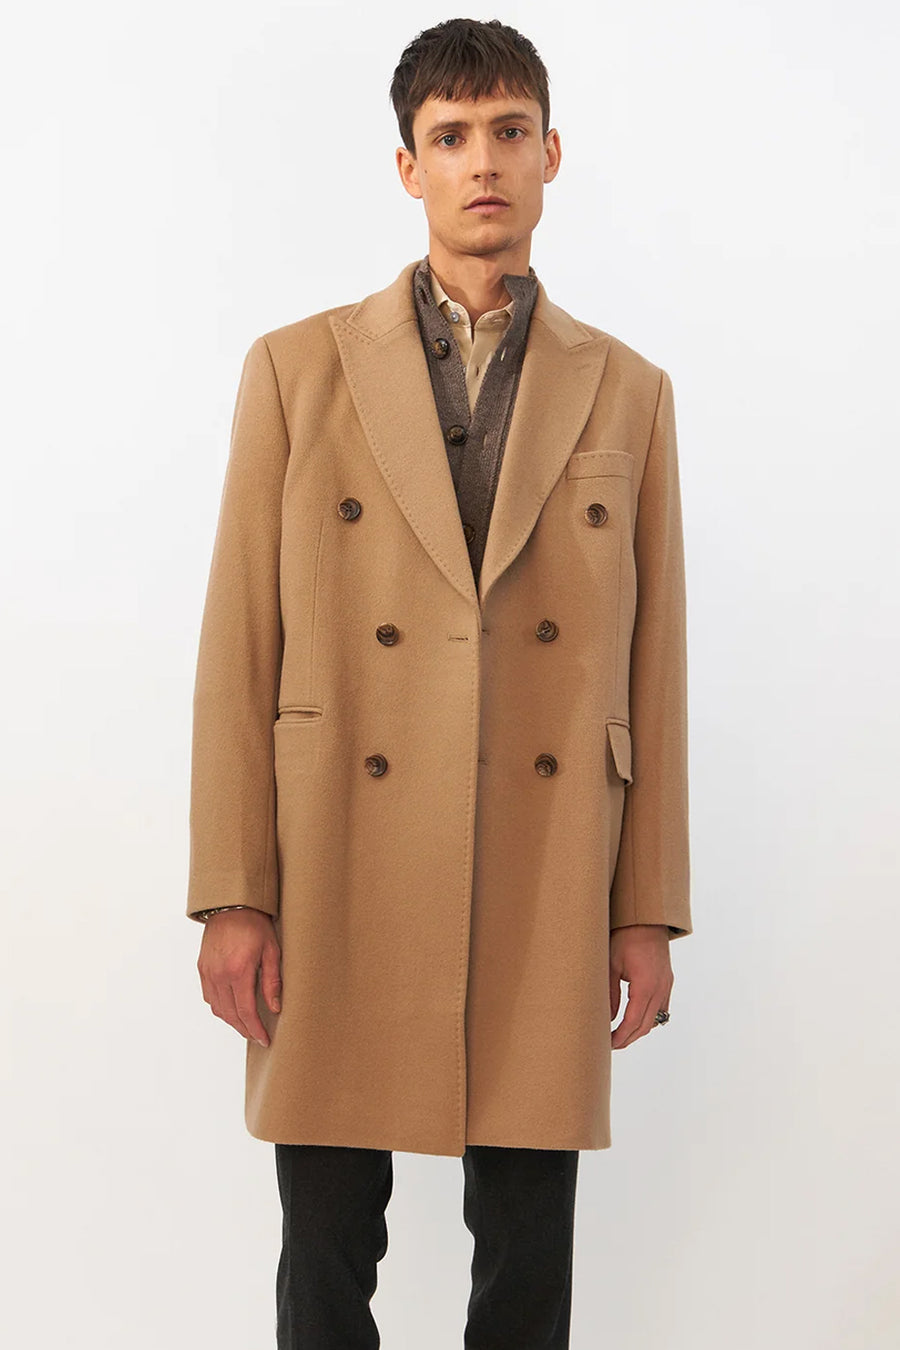 Buy the Sand Copenhagen Cashmere Coat Sultan in Camel at Intro. Spend £50 for free UK delivery. Official stockists. We ship worldwide.